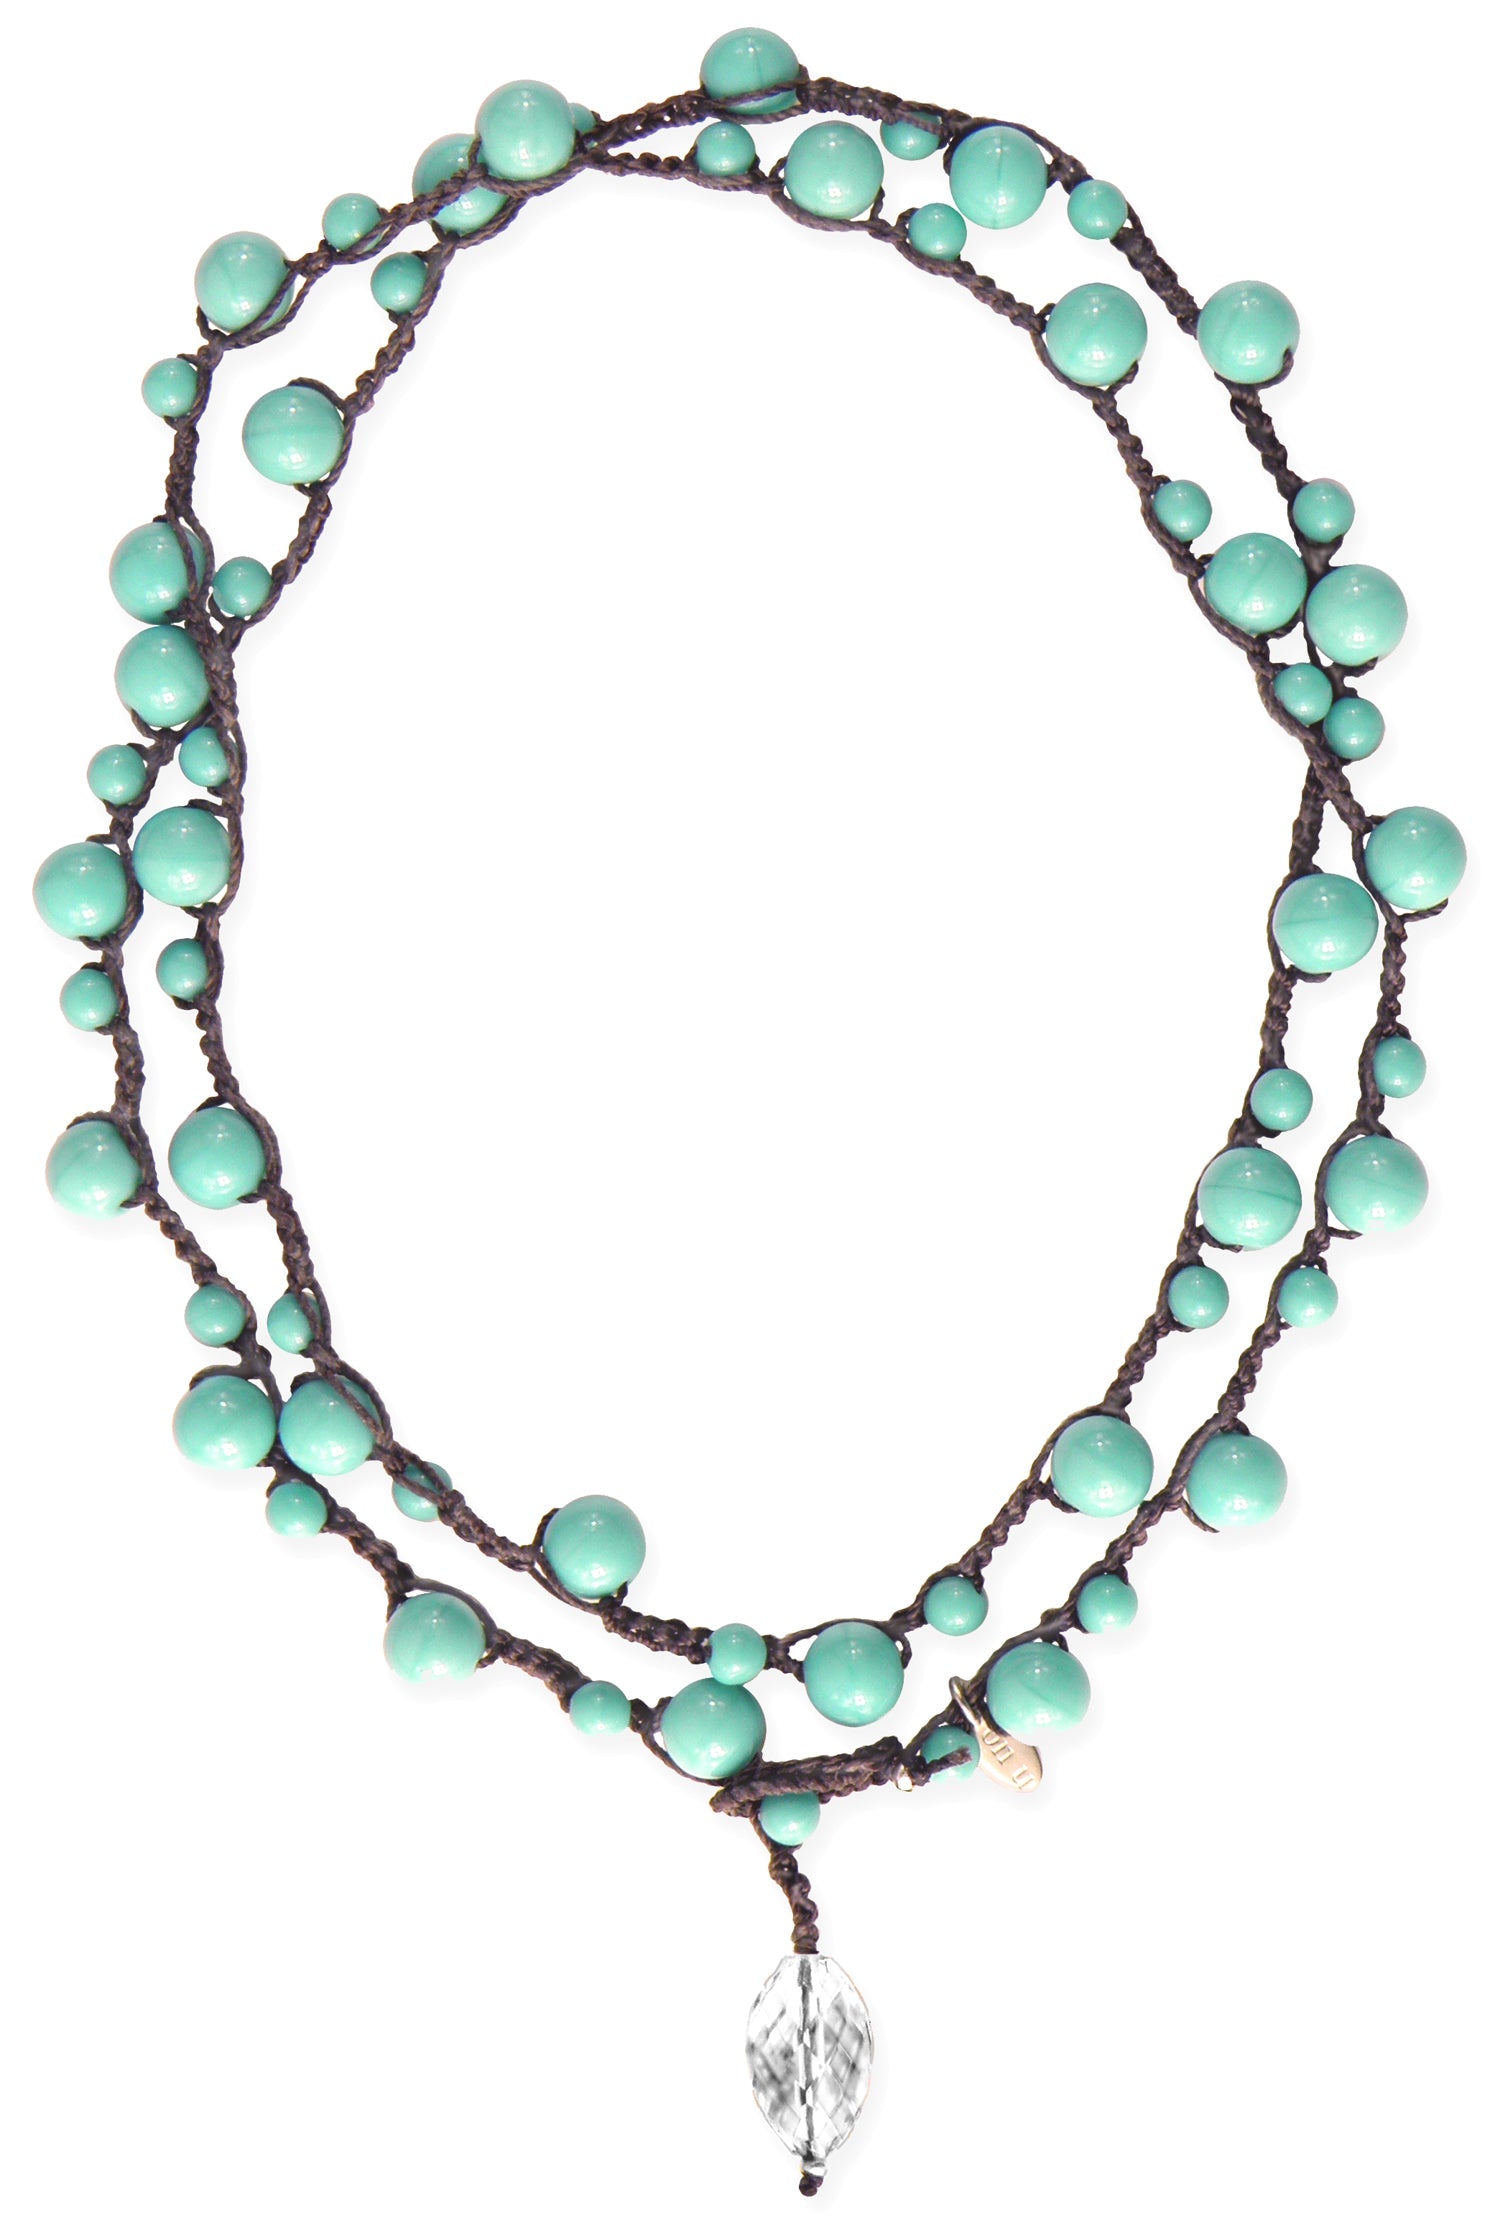 onujewelry.com - Michelle Necklace in Turquoise color handmade by Donna Silvestri, On U Jewelry, Richmond, VA